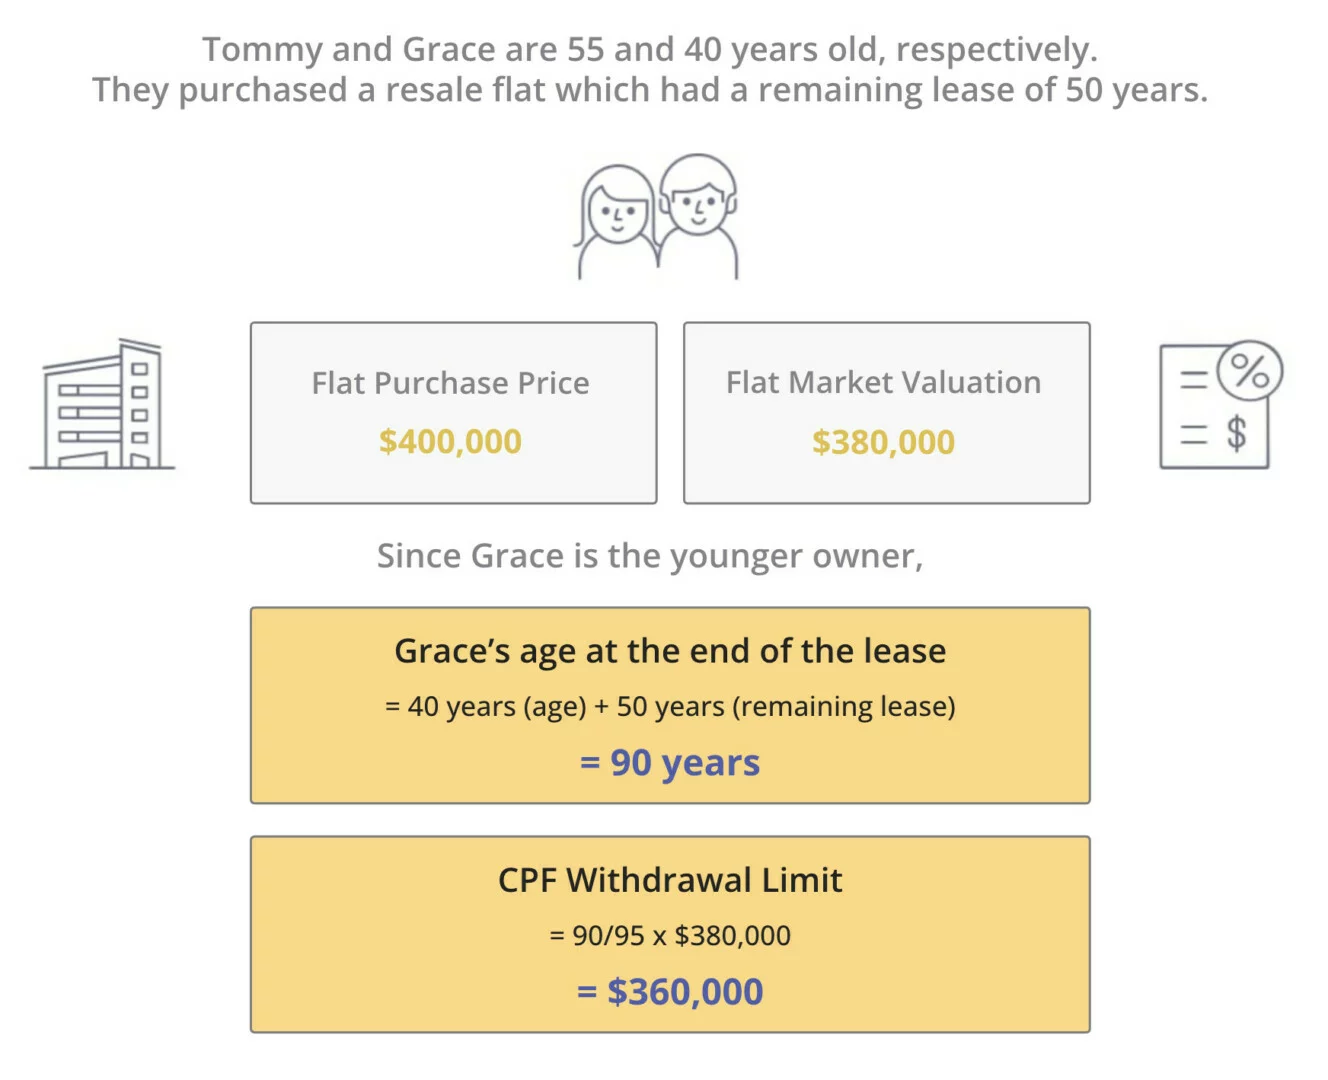 CPF withdrawal limit based on youngest owner's age at the end of the lease.